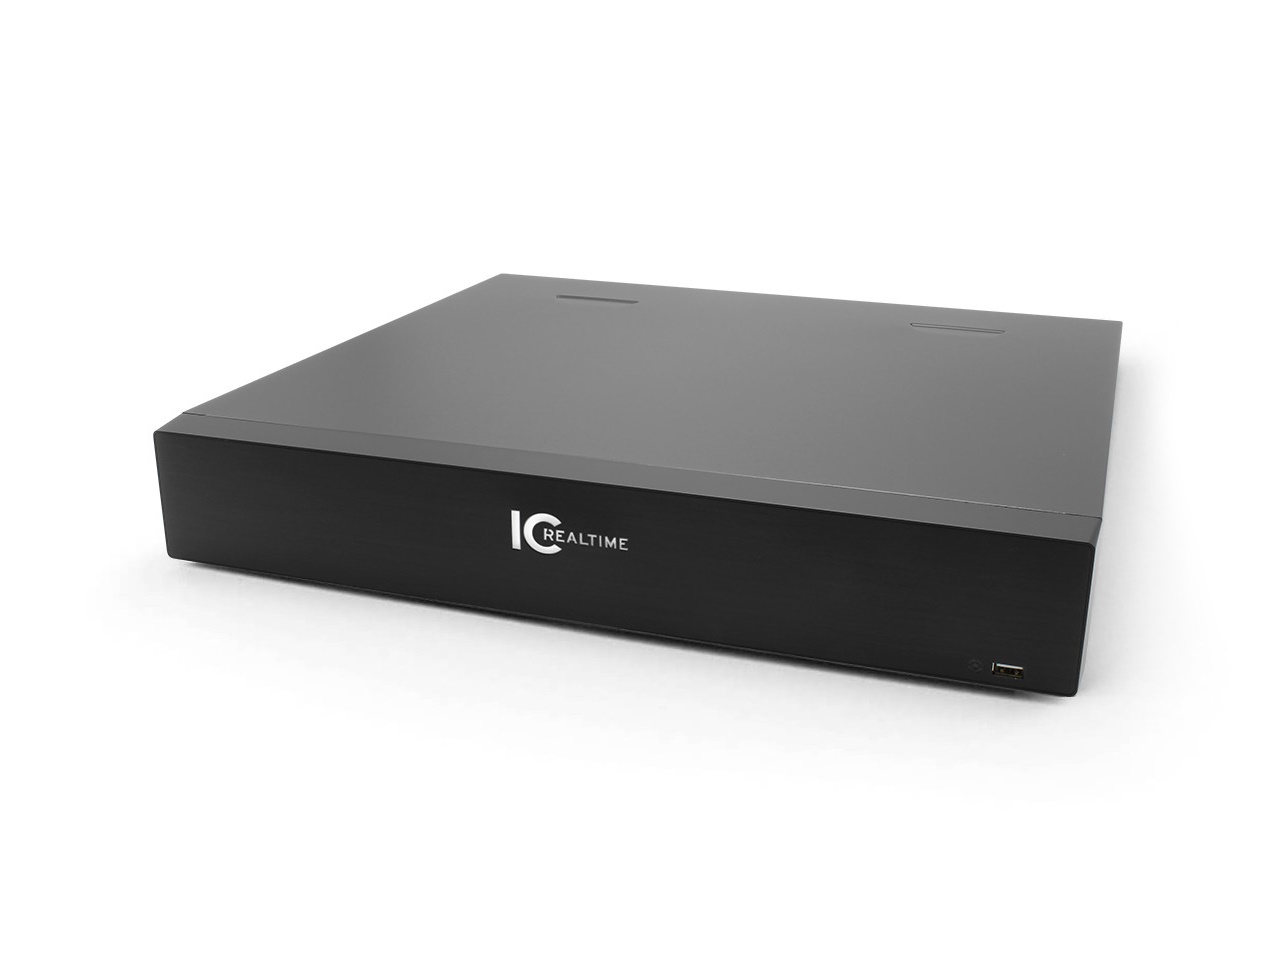 ICRealtime NVR-FX24POE-15U4K1-8TB 24 Channel Rack-Mountable 1.5U NVR/Integrated 24 Port POE Switch/Supports 12MP Resolution/320Mbps Throughput/8TB